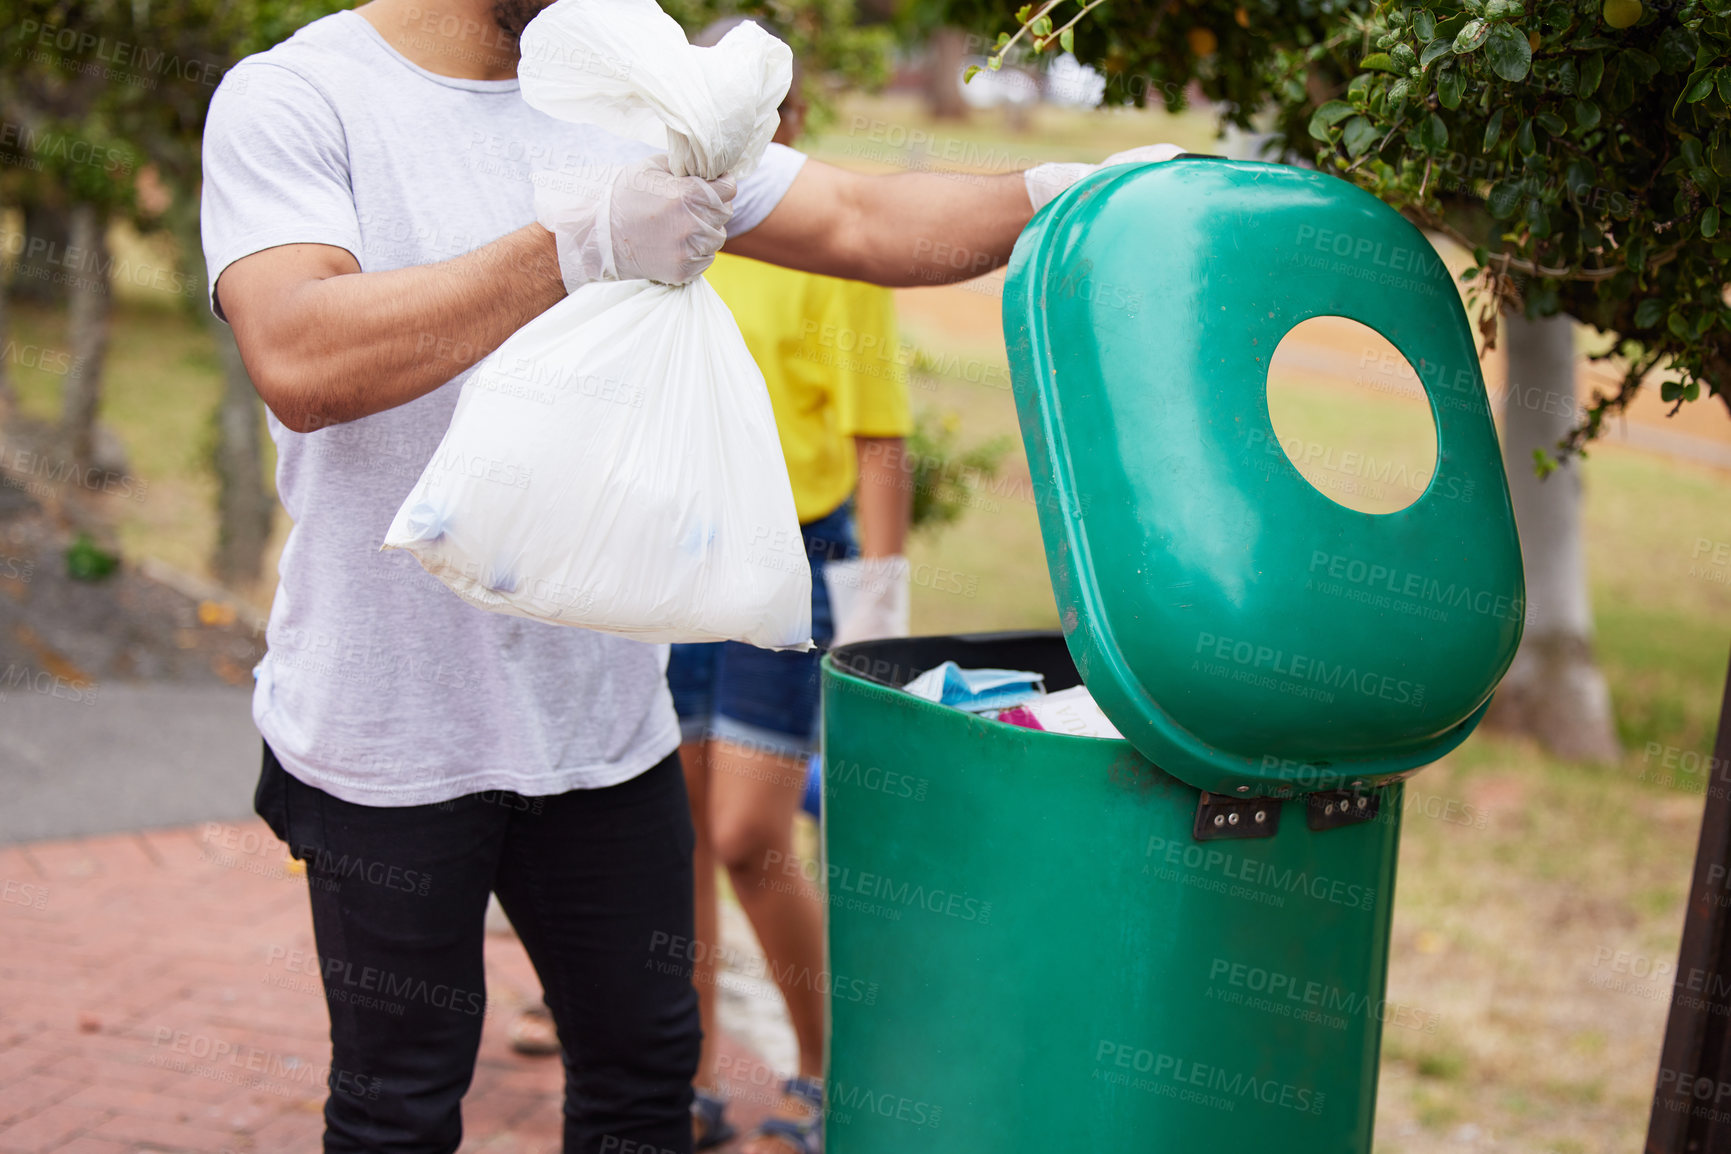 Buy stock photo Volunteer cleaning, trash bin and man throw garbage, pollution or waste product for environment support. Community help, NGO charity and eco friendly people helping with nature park plastic clean up